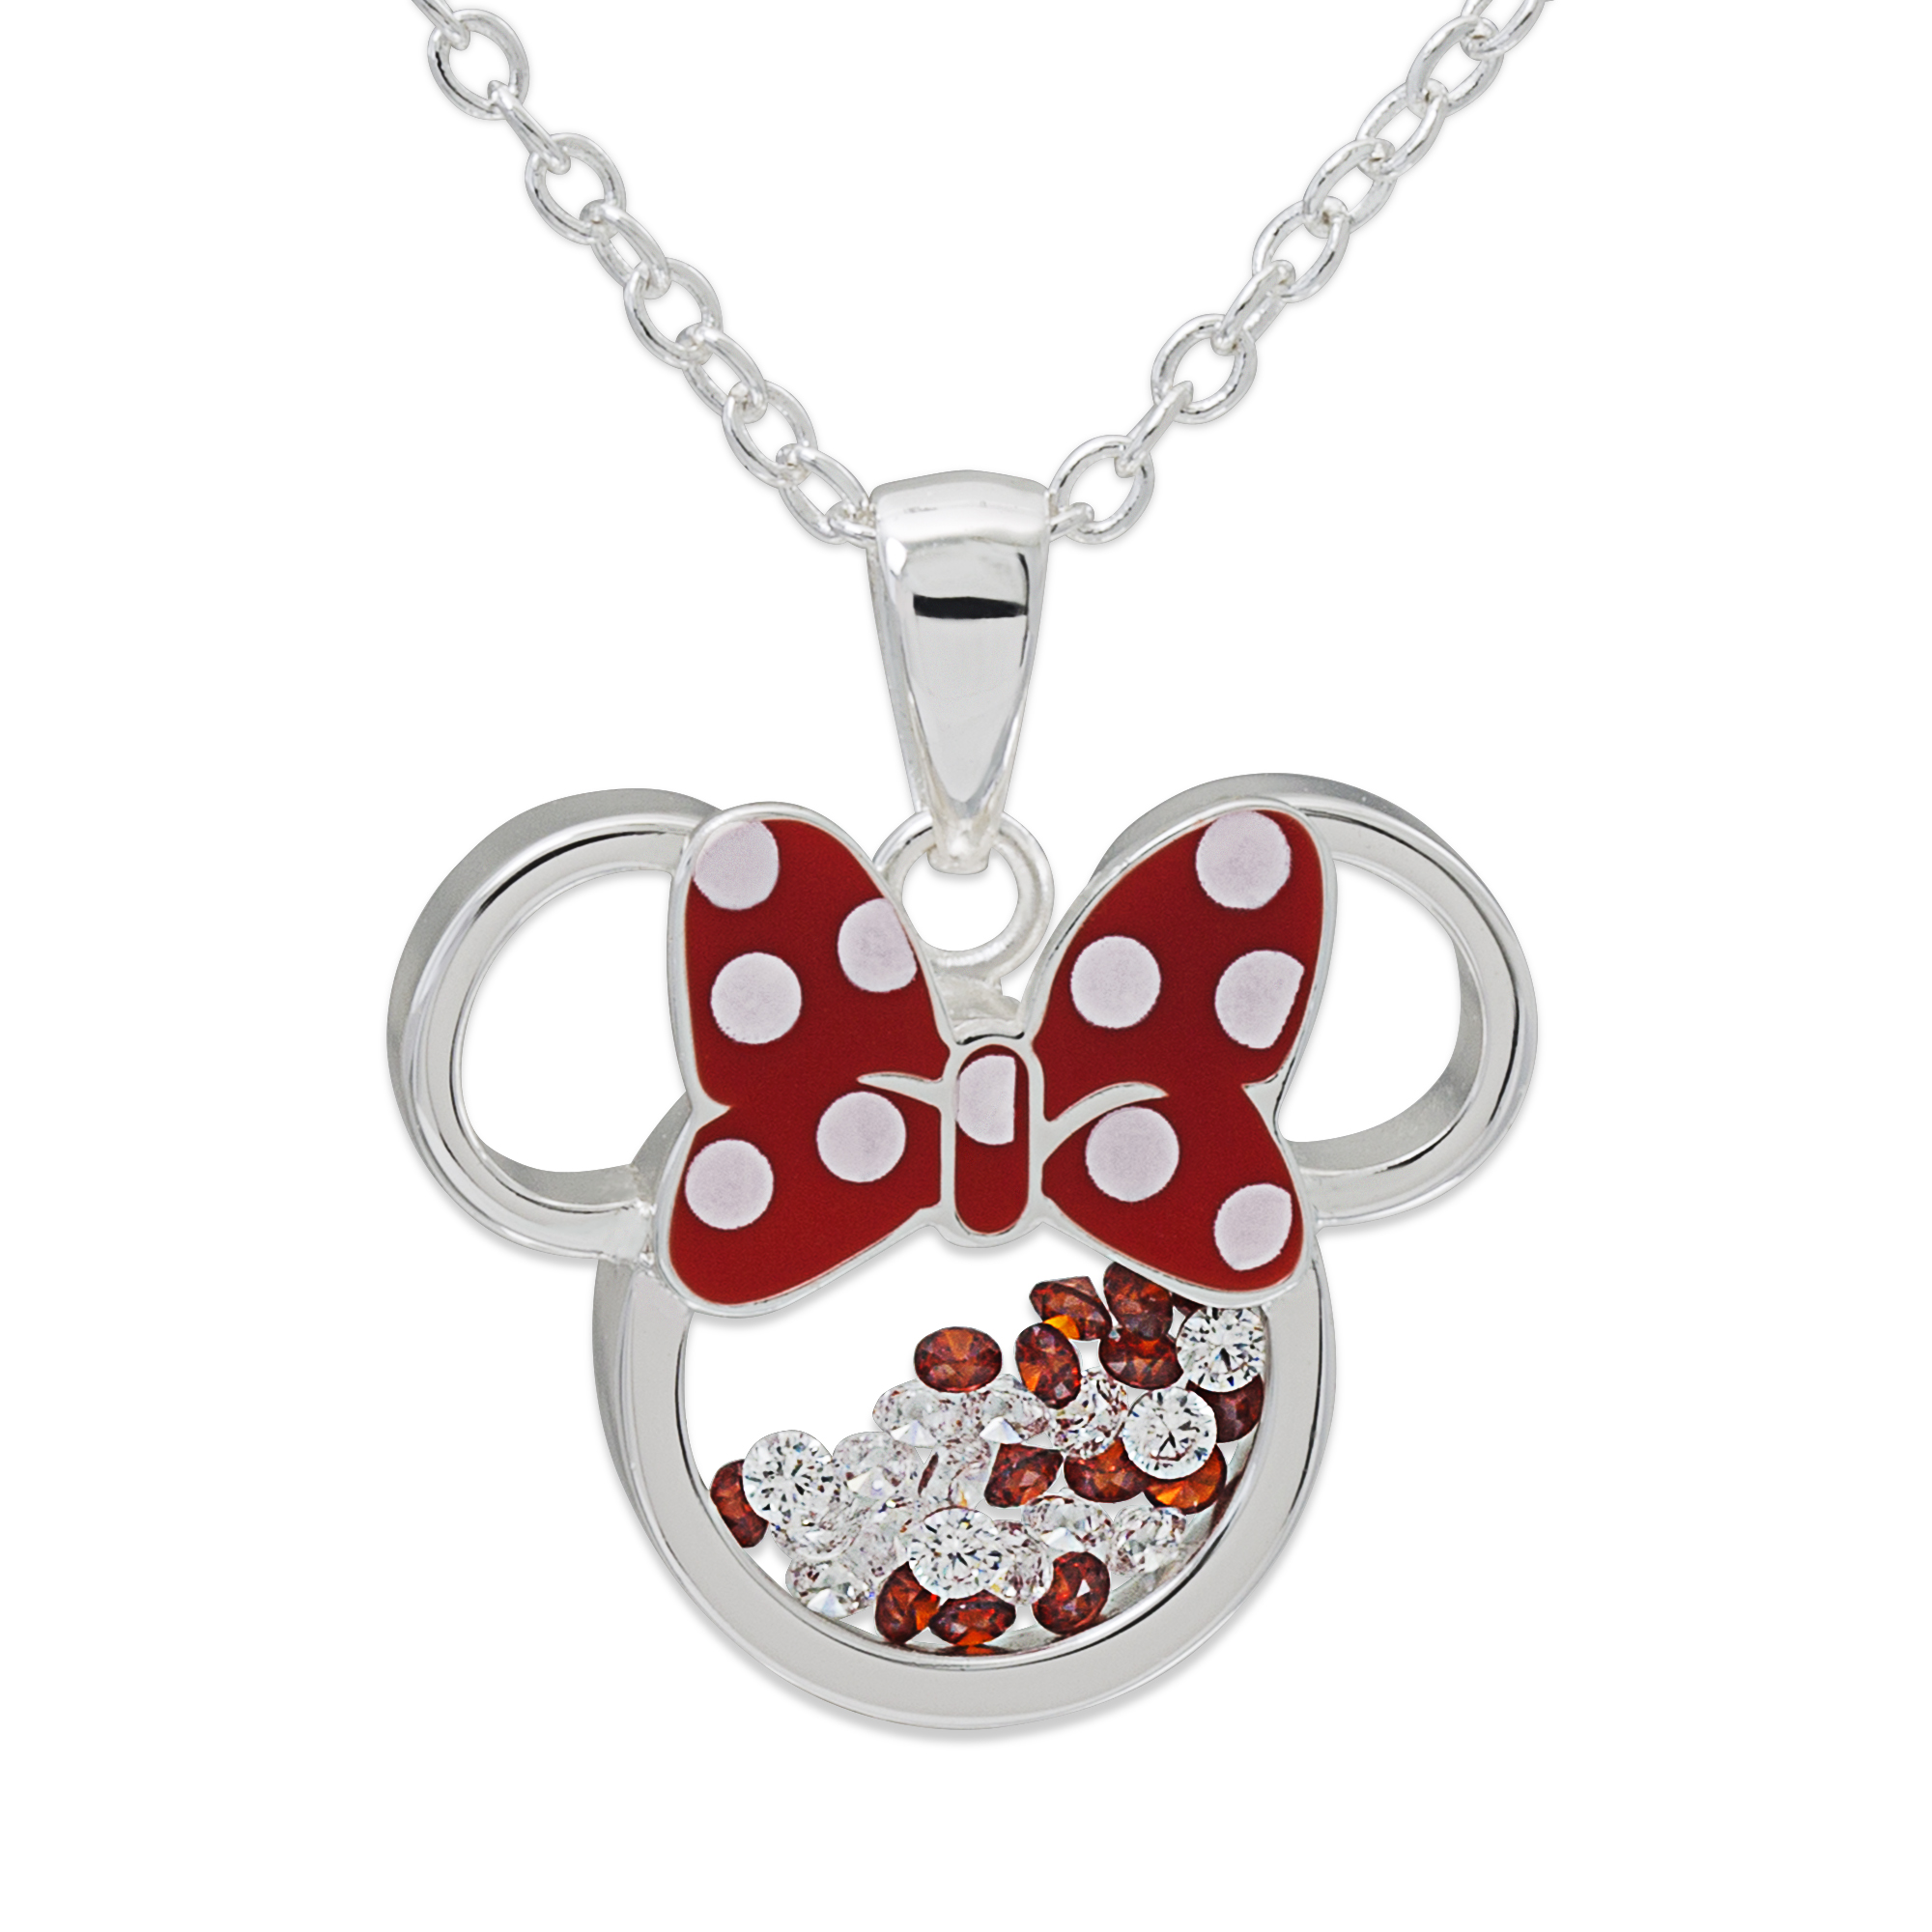 Disney Minnie Mouse Silver Plated Floating Crystals Pendant w/Chain Jewelry